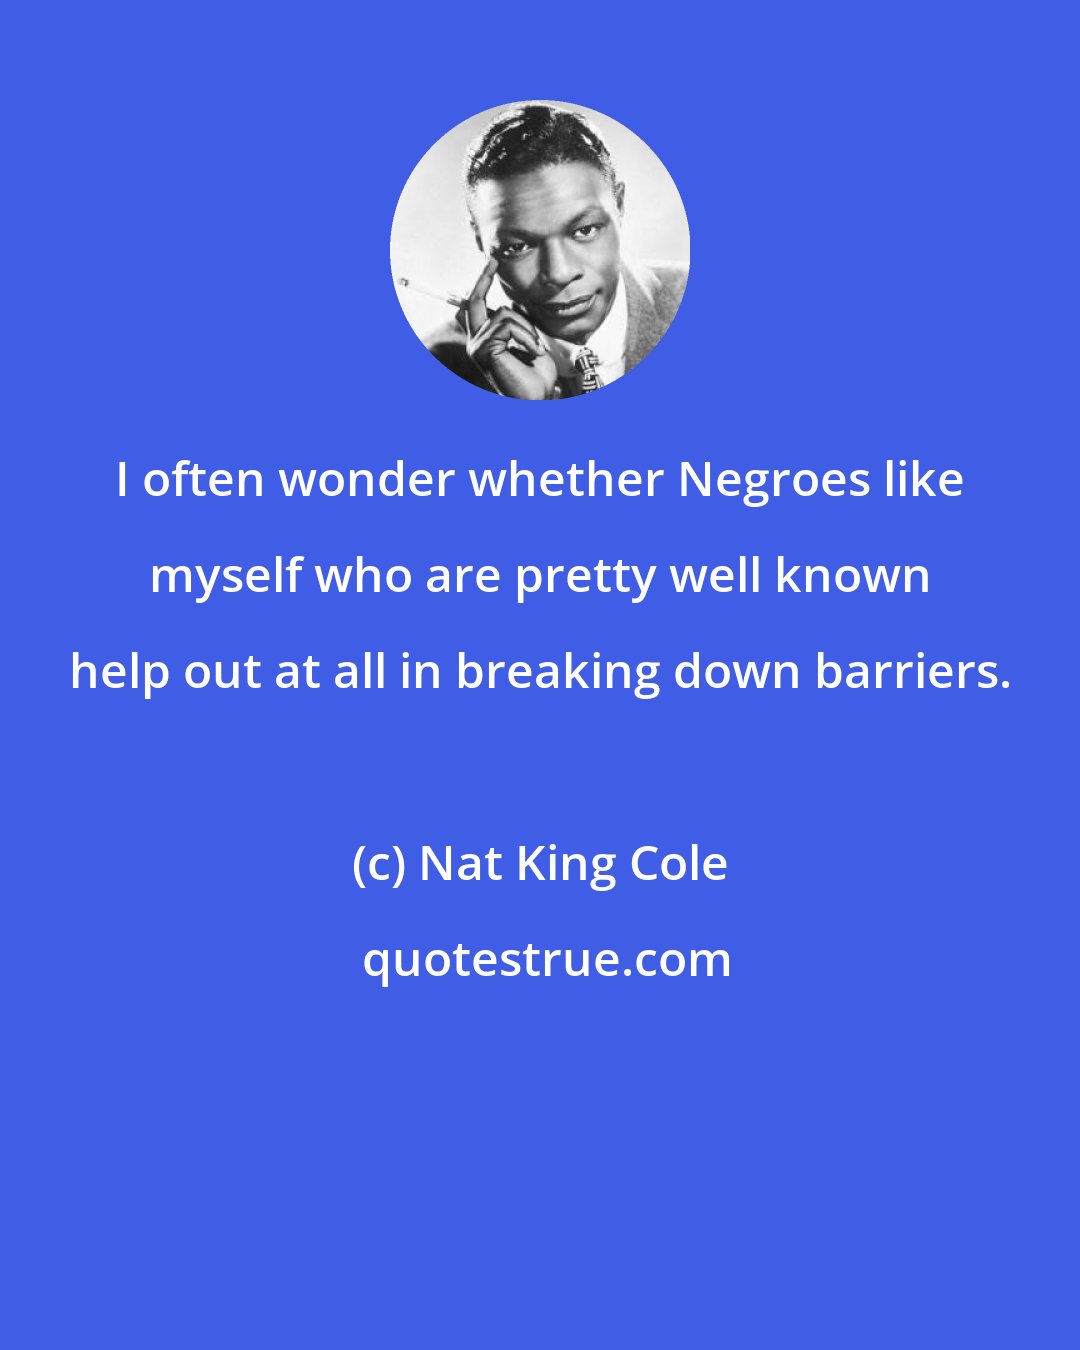 Nat King Cole: I often wonder whether Negroes like myself who are pretty well known help out at all in breaking down barriers.